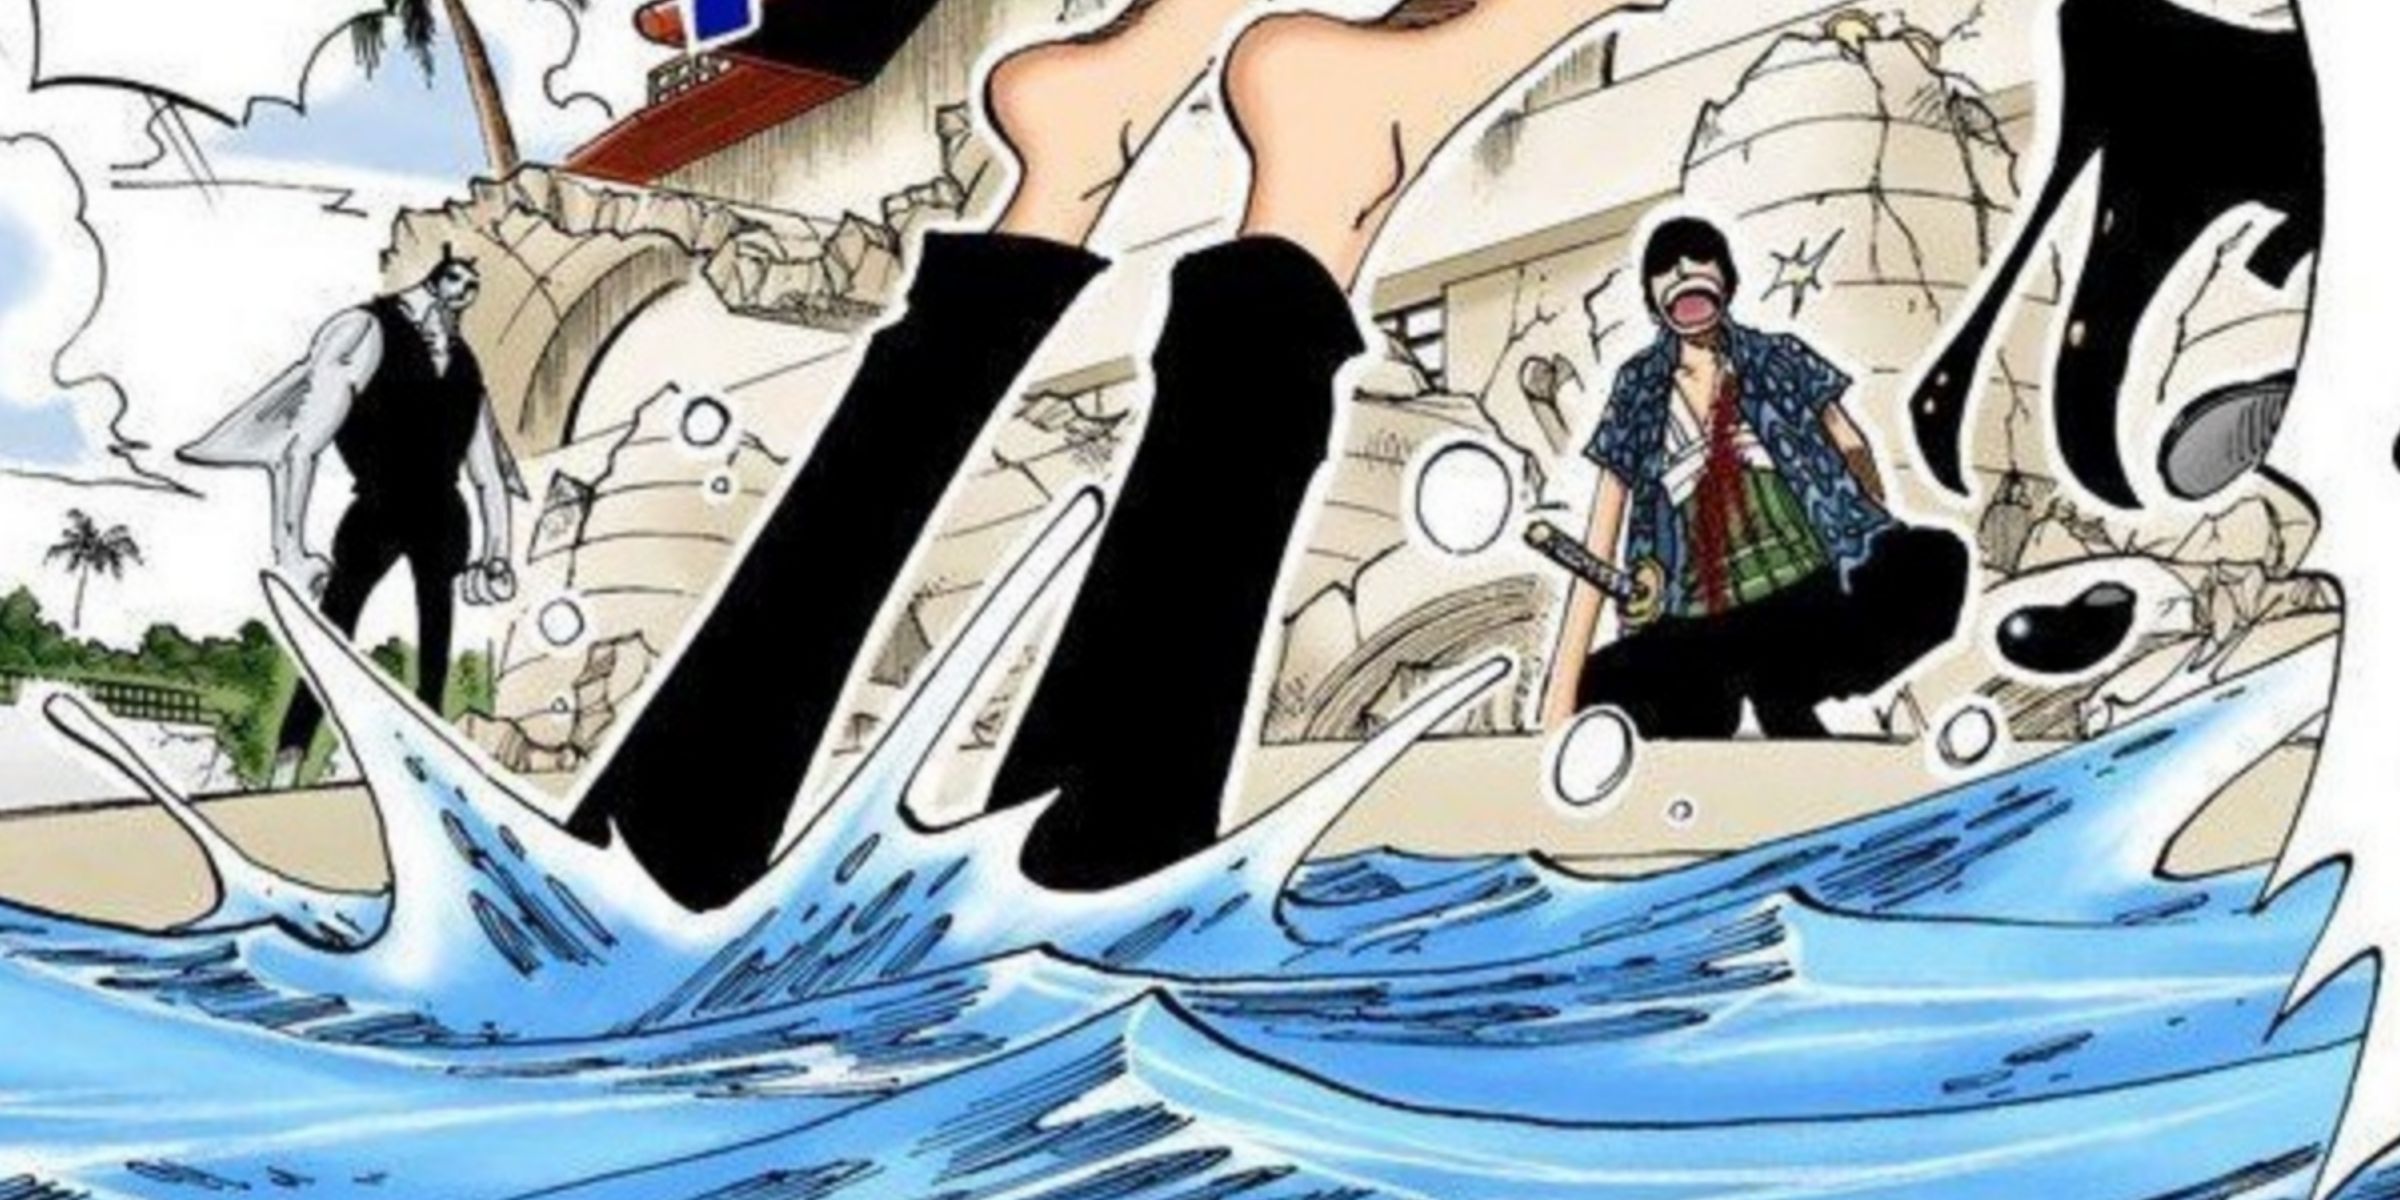 Sanji jumps in the water to save Luffy